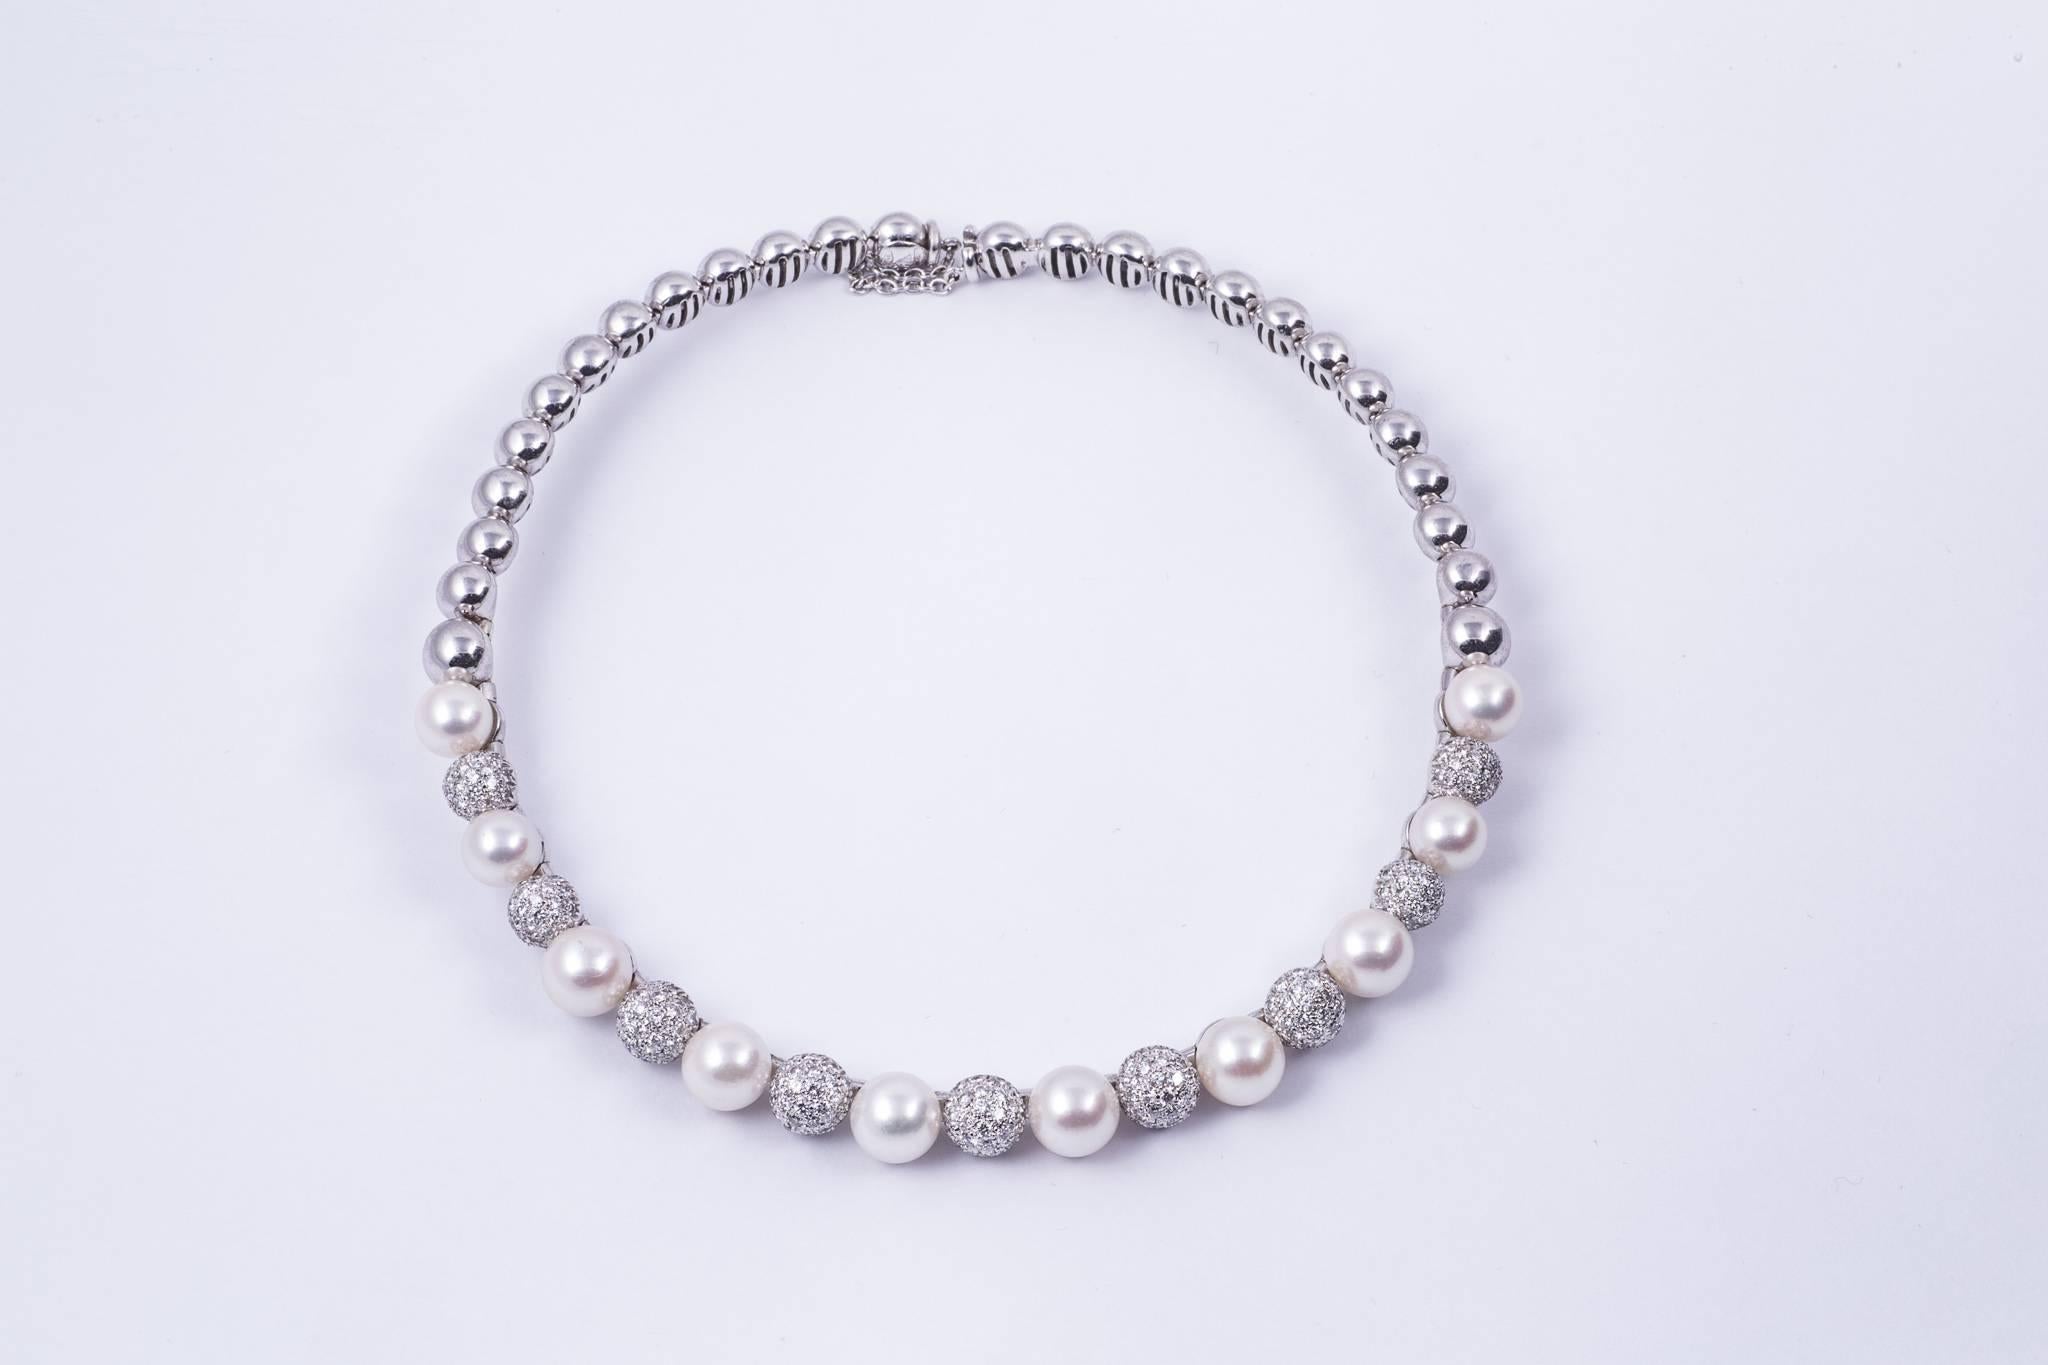 Elegant cultured akoya pearl and diamond necklace. The center pearl measures 9.20mm graduating to 8.2mm. There are 10 pearls in total. There are 9 pavé diamond balls in-between the pearls. The total weight of the diamond is approx. 8.00cts and the